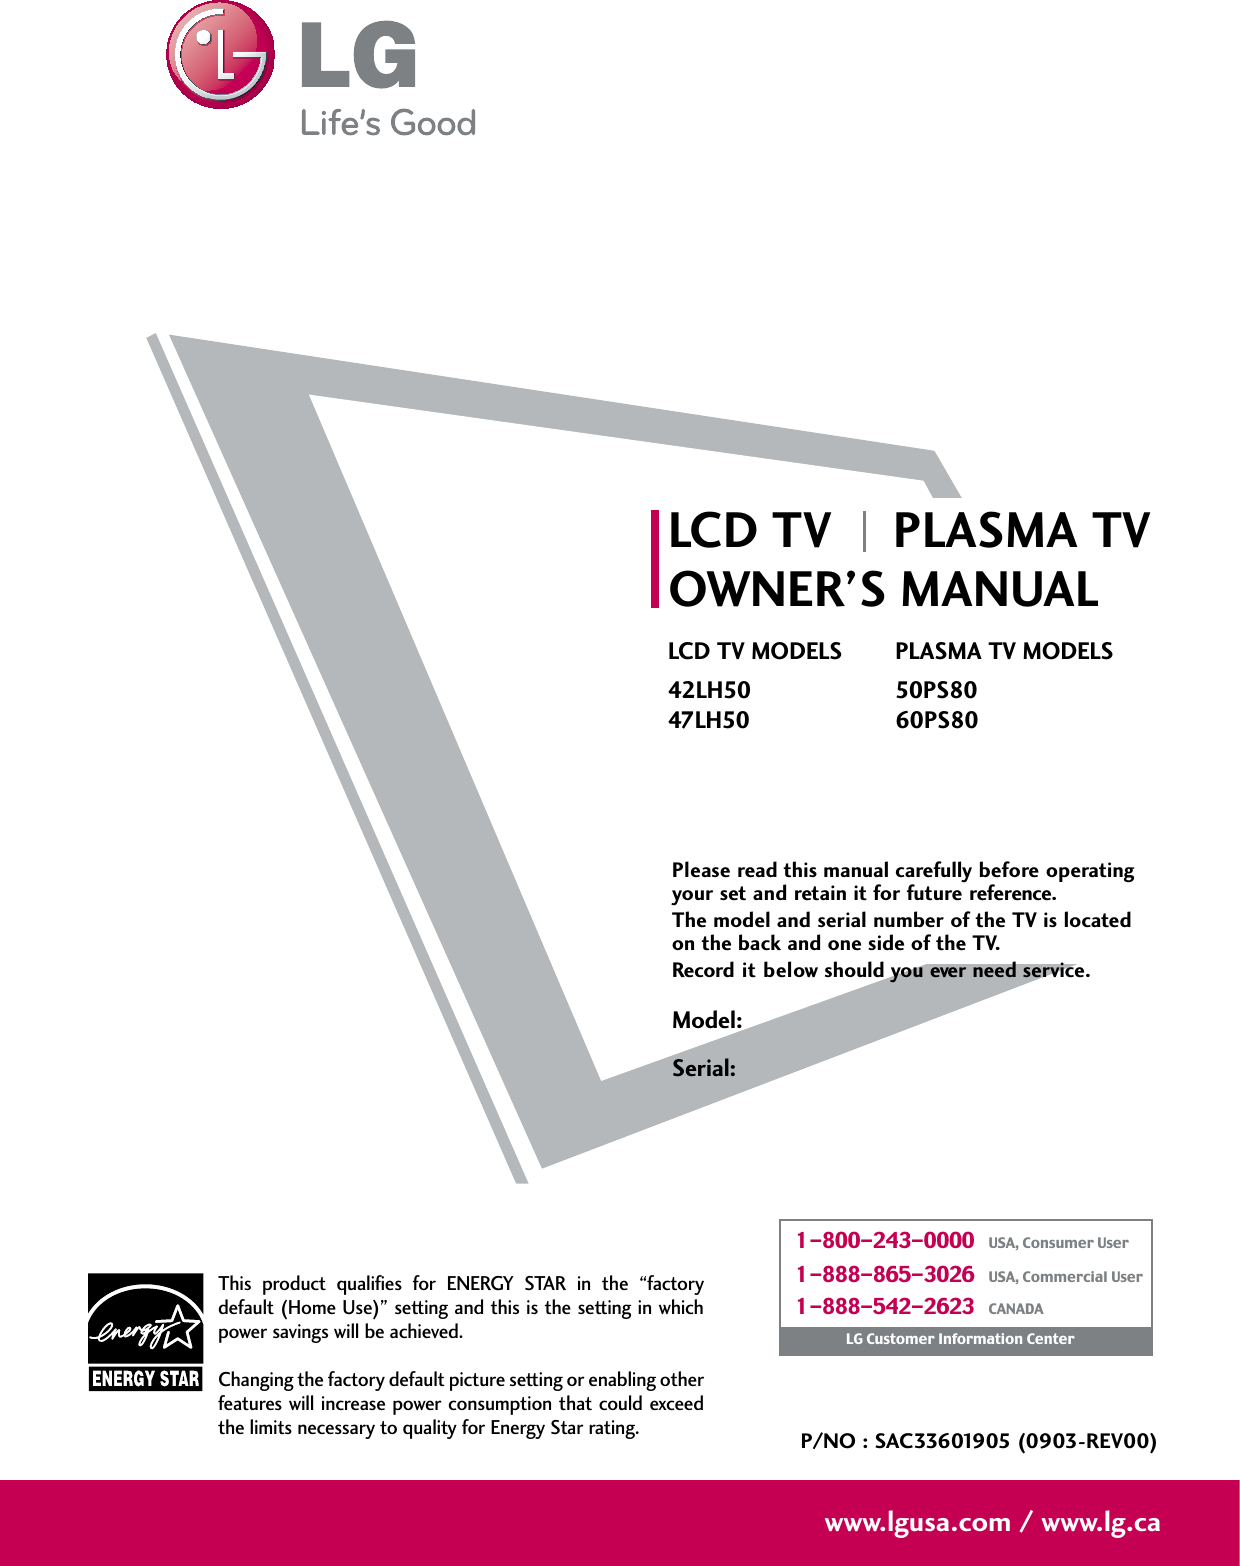 Please read this manual carefully before operatingyour set and retain it for future reference.The model and serial number of the TV is locatedon the back and one side of the TV. Record it below should you ever need service.P/NO : SAC33601905 (0903-REV00)www.lgusa.com / www.lg.caThis product qualifies for ENERGY STAR in the “factorydefault (Home Use)” setting and this is the setting in whichpower savings will be achieved.Changing the factory default picture setting or enabling otherfeatures will increase power consumption that could exceedthe limits necessary to quality for Energy Star rating.Model:Serial:1-800-243-0000   USA, Consumer User1-888-865-3026   USA, Commercial User1-888-542-2623   CANADALG Customer Information CenterLCD TV PLASMA TVOWNER’S MANUALLCD TV MODELS42LH5047LH50PLASMA TV MODELS50PS8060PS80